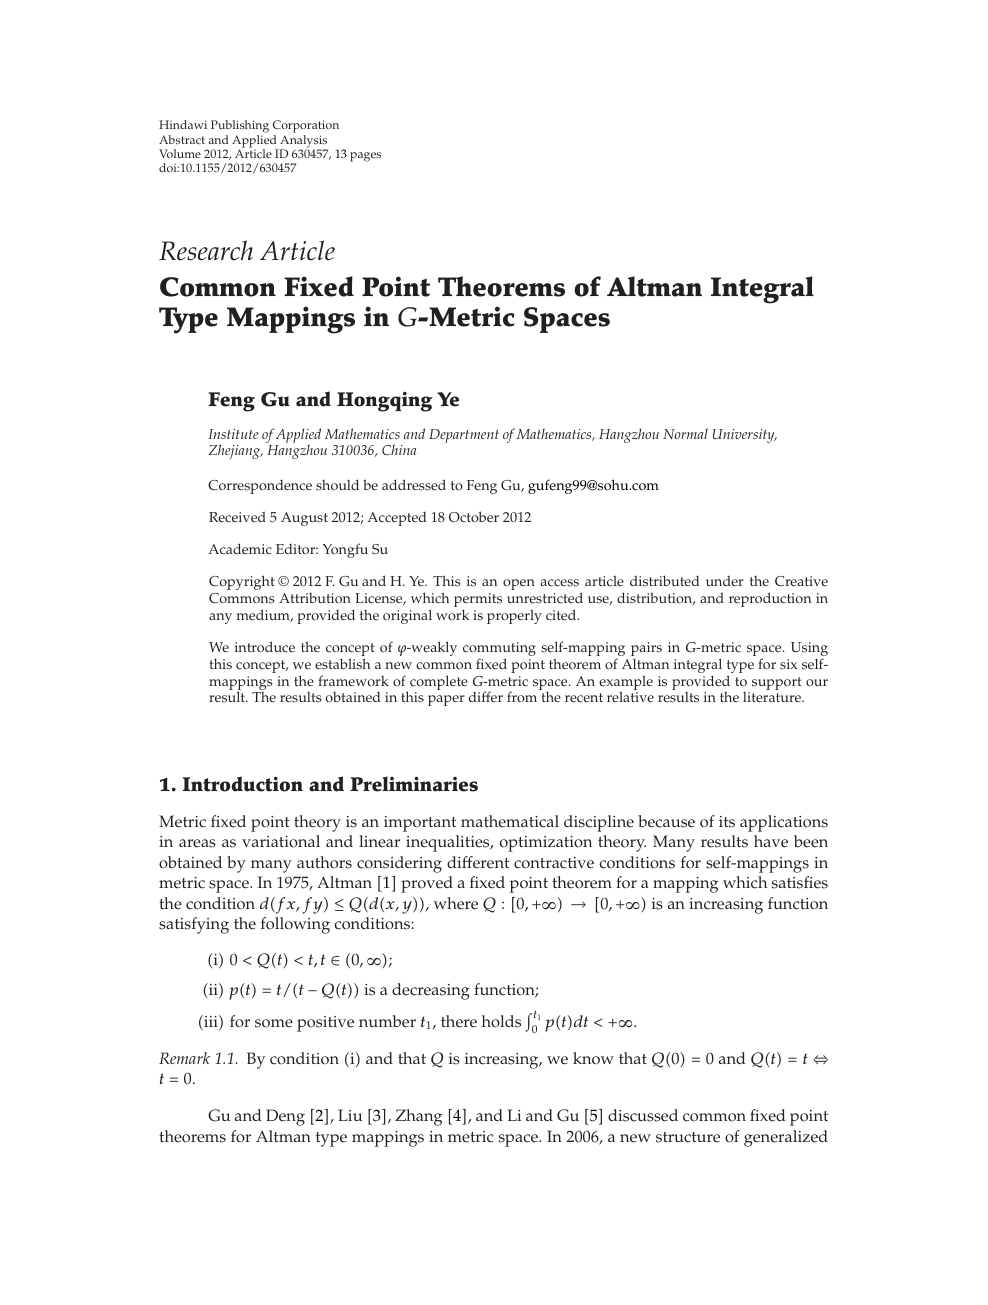 Common Fixed Point Theorems Of Altman Integral Type Mappings In G Metric Spaces Topic Of Research Paper In Mathematics Download Scholarly Article Pdf And Read For Free On Cyberleninka Open Science